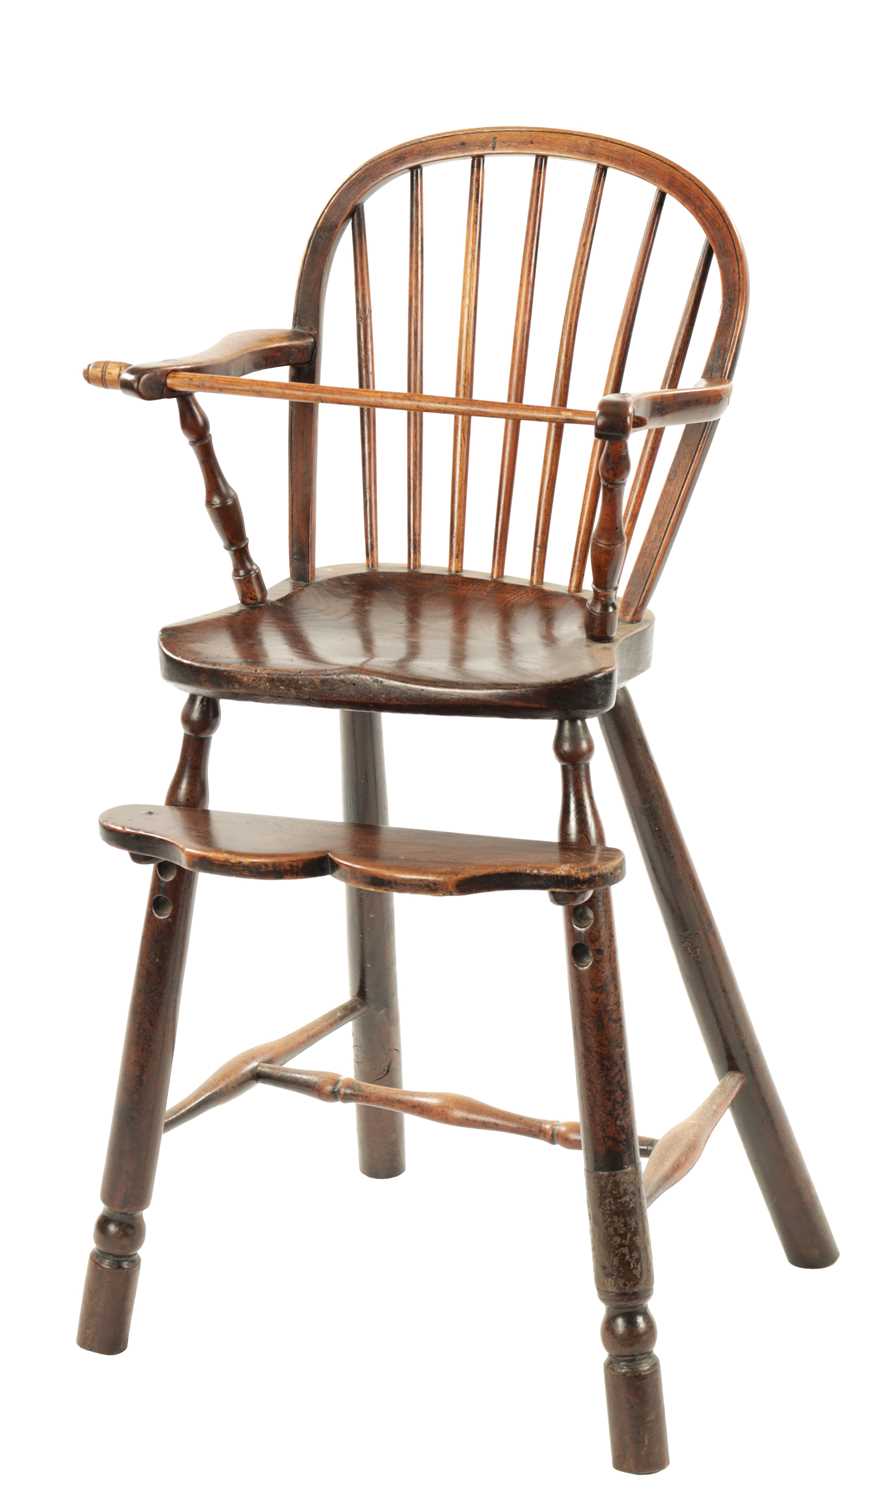 A 19TH CENTURY FRUITWOOD CHILDREN’S SPINDLE BACK HIGH CHAIR